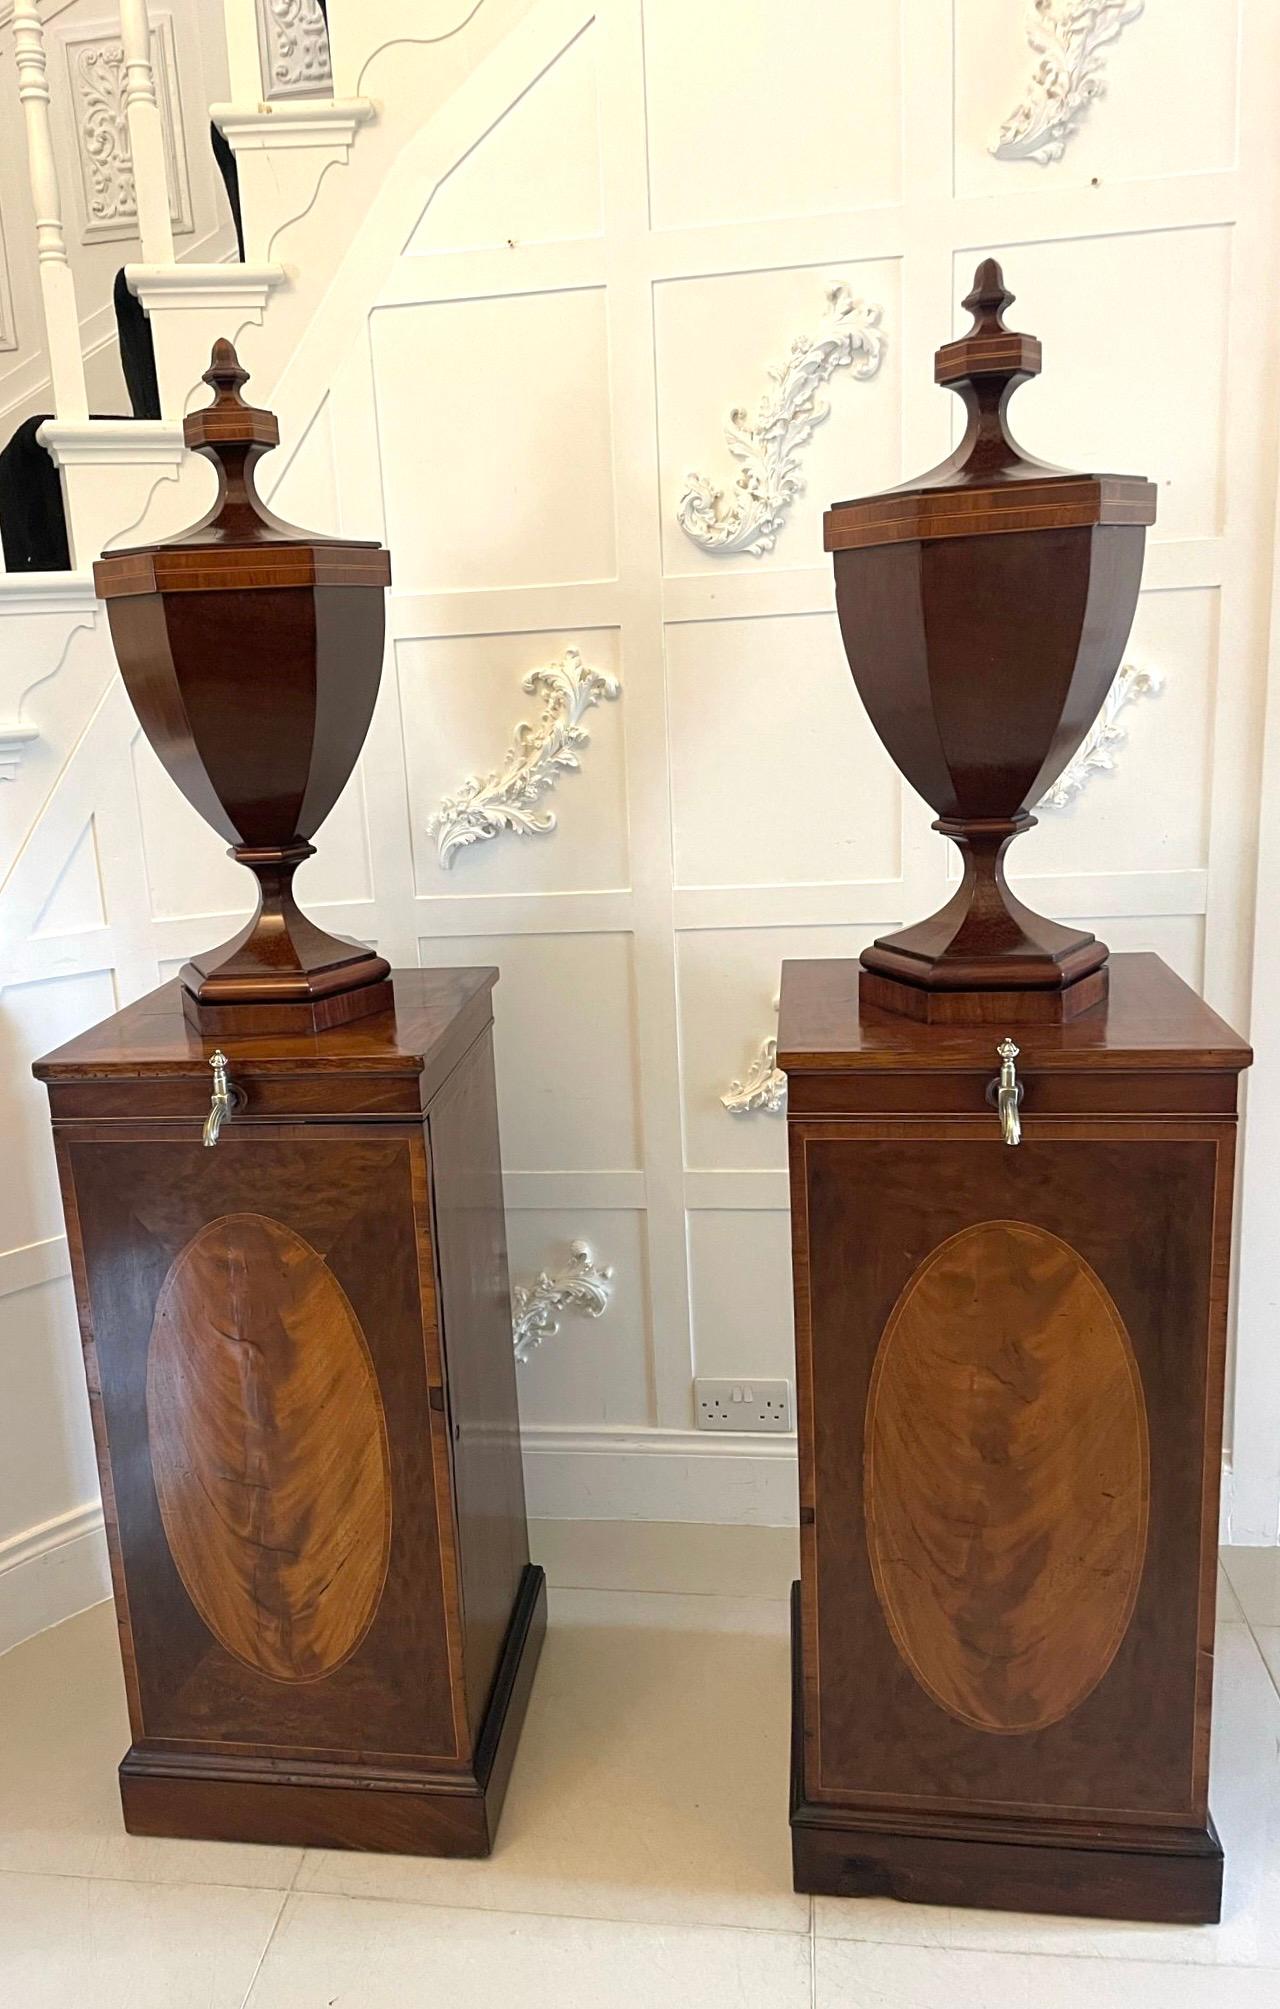 Rare pair of antique George III outstanding quality mahogany inlaid wine urns on original pedestal cupboards having a lift off shaped lidded top revealing the original lead lining, hexagonal shaped urn with satinwood inlay above a freestanding